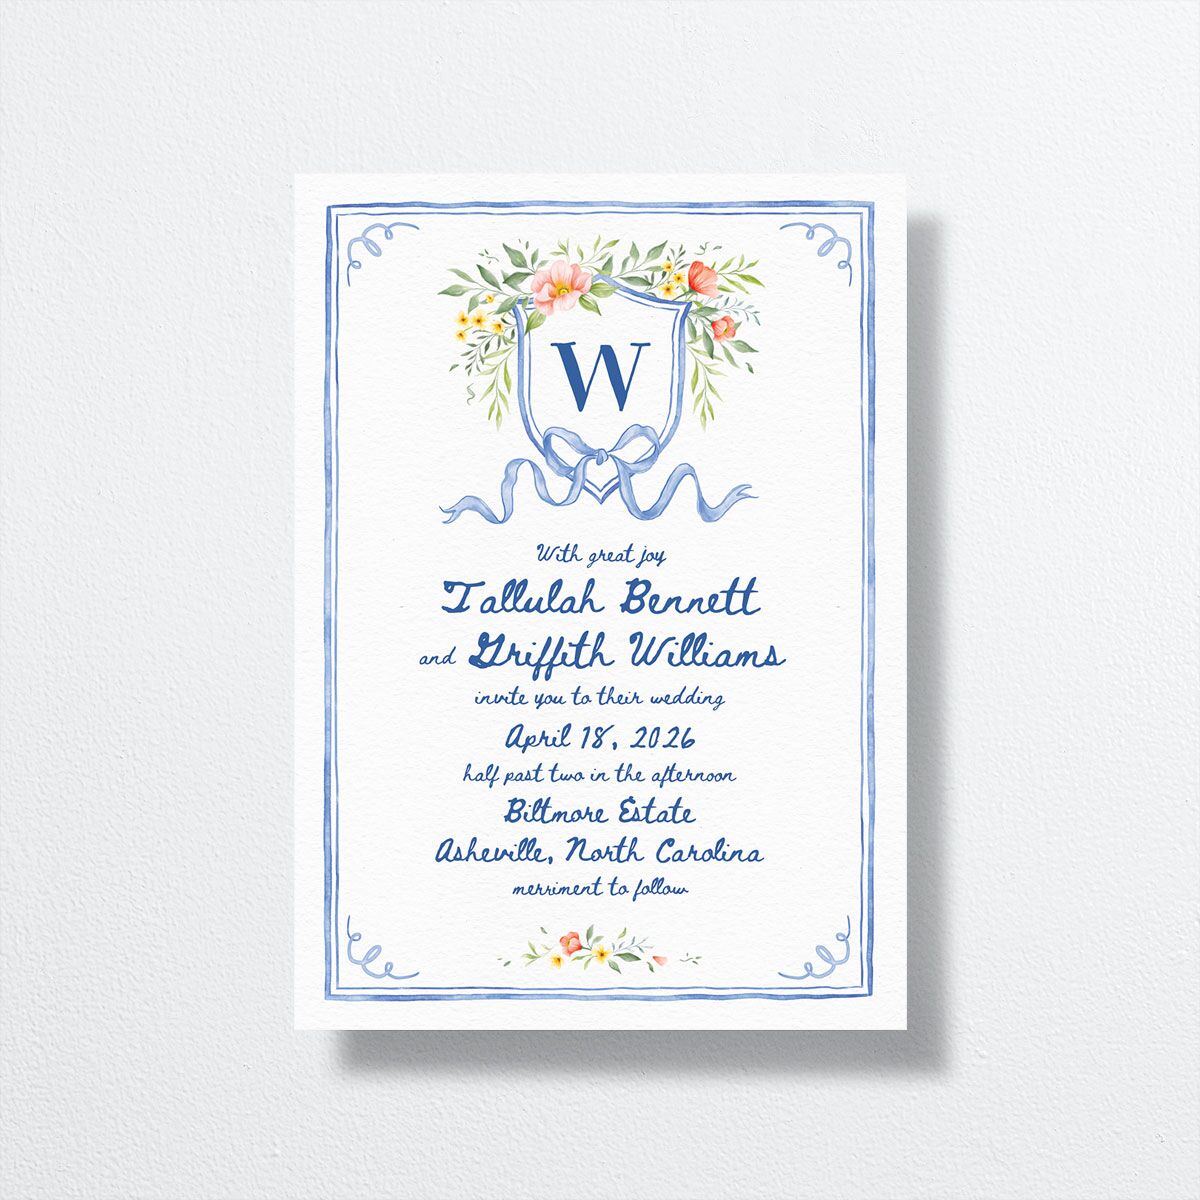 Countryside Crest Wedding Invitations front in blue